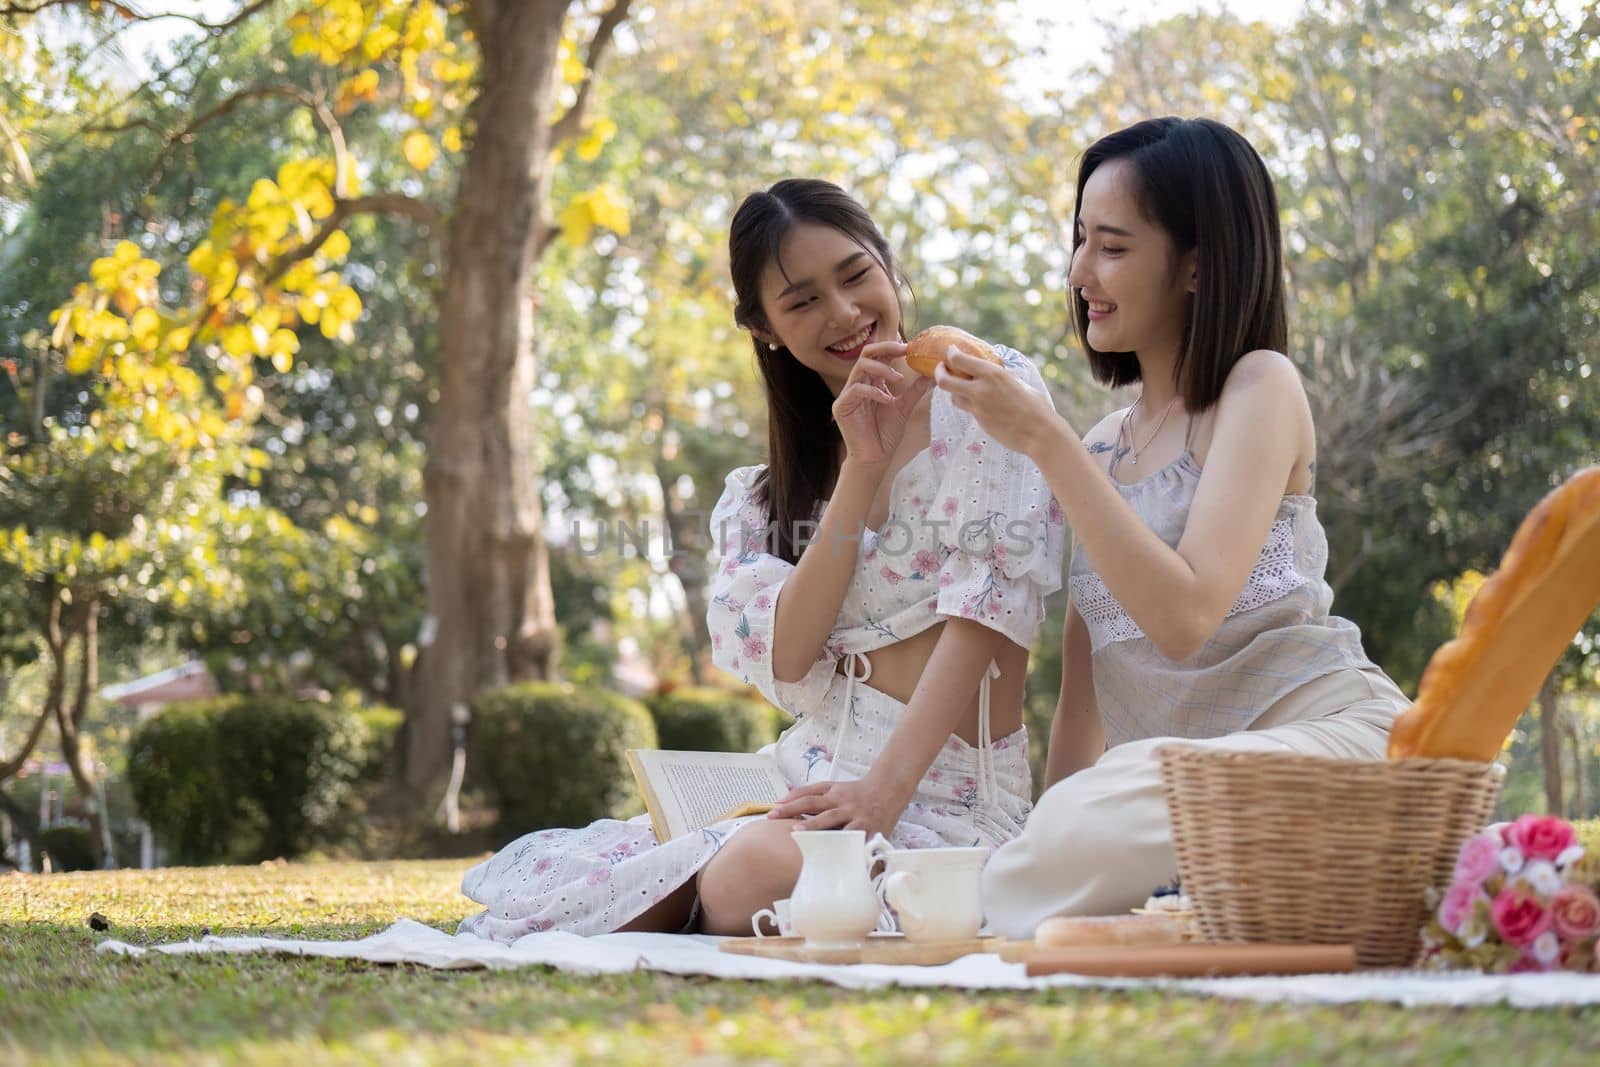 Two charming Asian women in beautiful dresses sitting on picnic cloth, having an tea picnic party together in the garden.